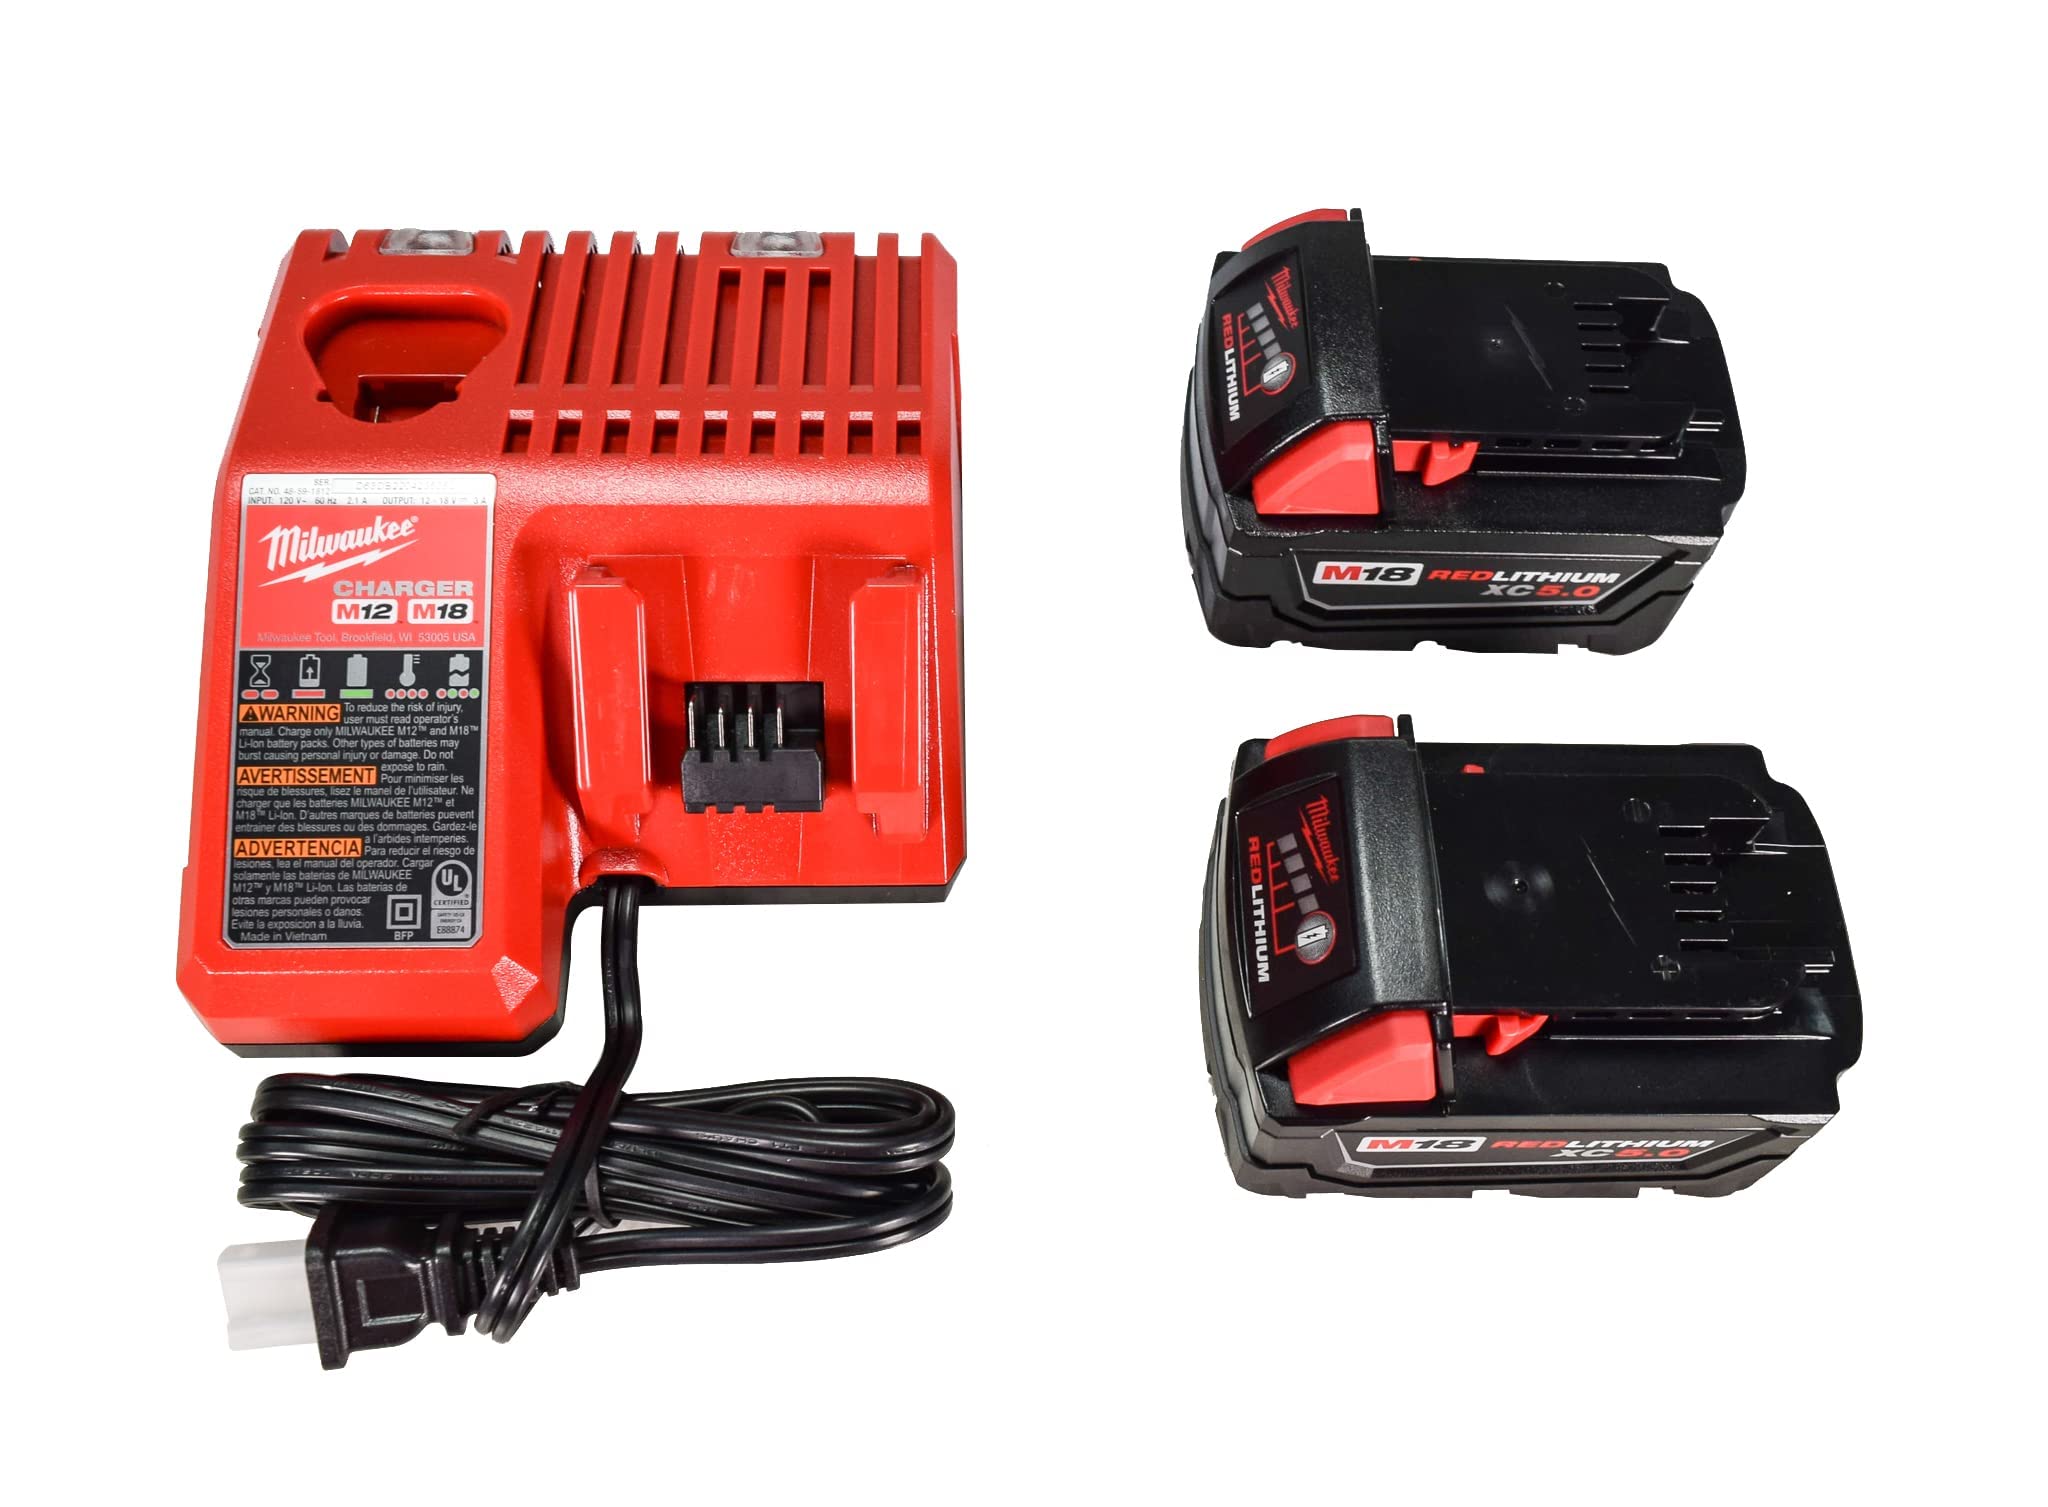 Milwaukee 2953-22 18V Cordless Brushless 1/4" Hex Impact Driver Kit with (2) 5.0Ah Lithium Ion Batteries, Charger & Tool Case